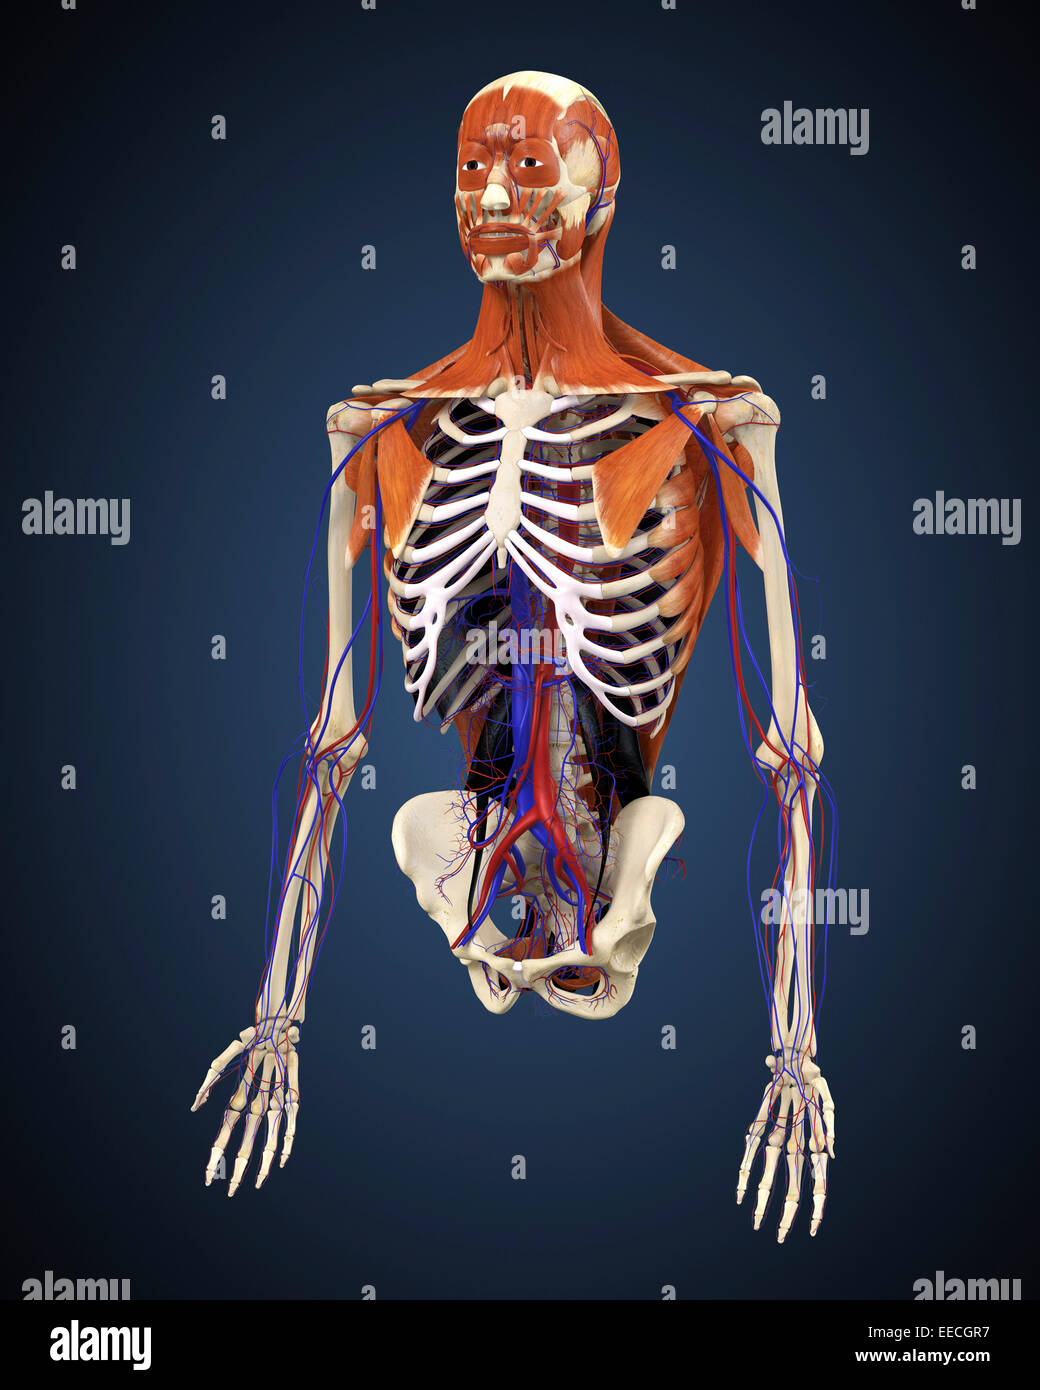 Human Upper Body Showing Bones Muscles And Circulatory System Stock